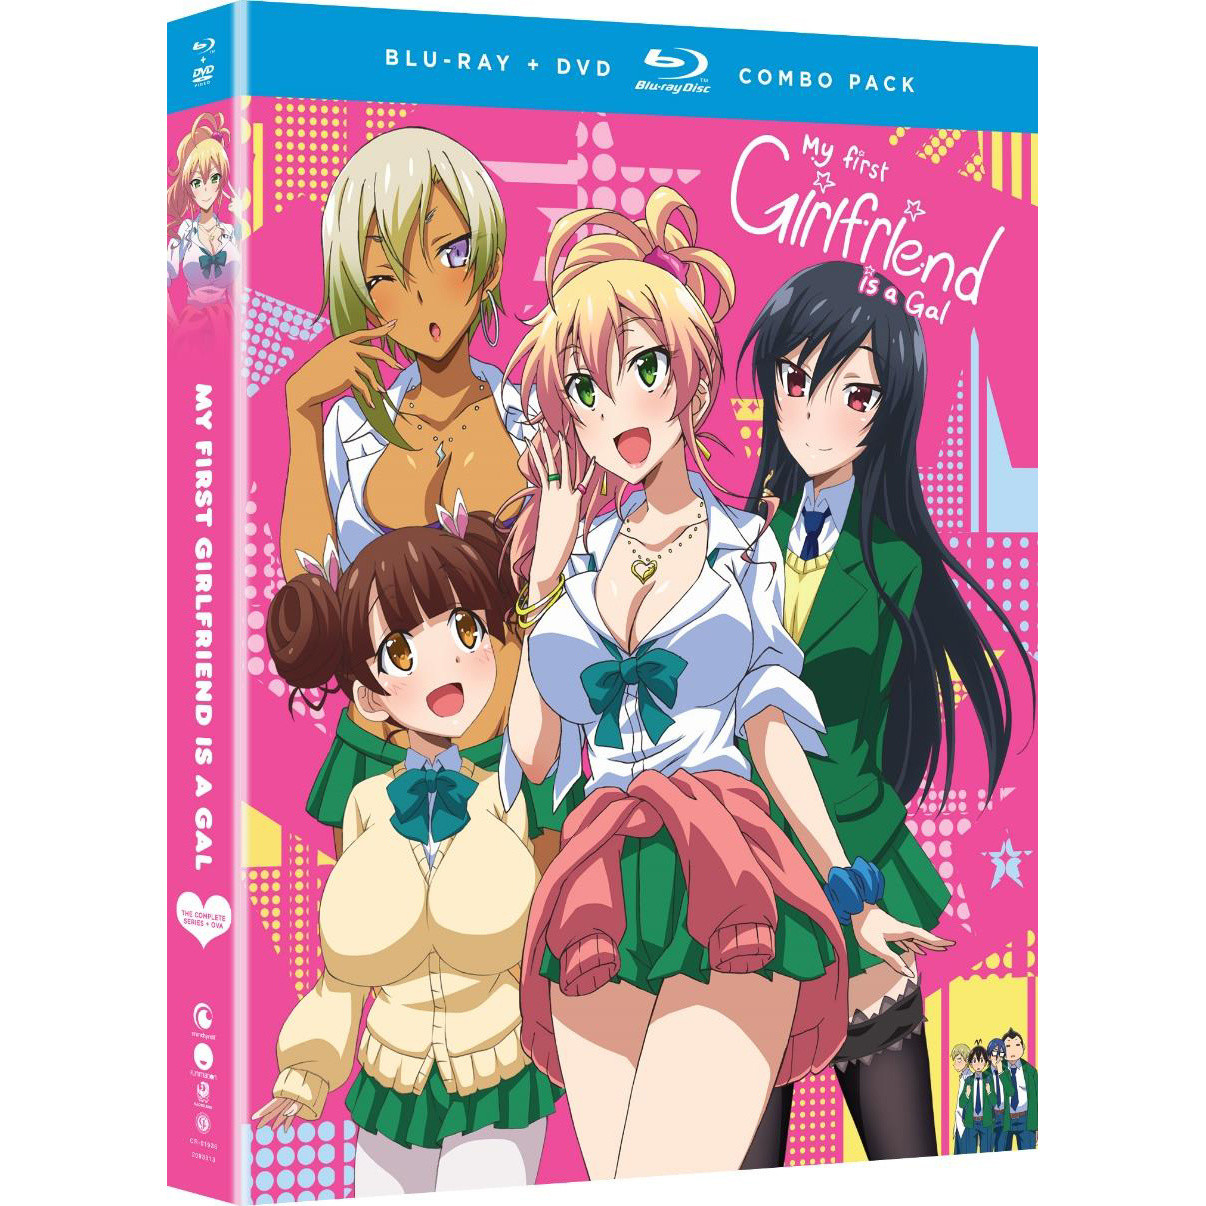 My First Girlfriend is a Gal: The Complete Series Blu-ray/DVD Combo Pack.